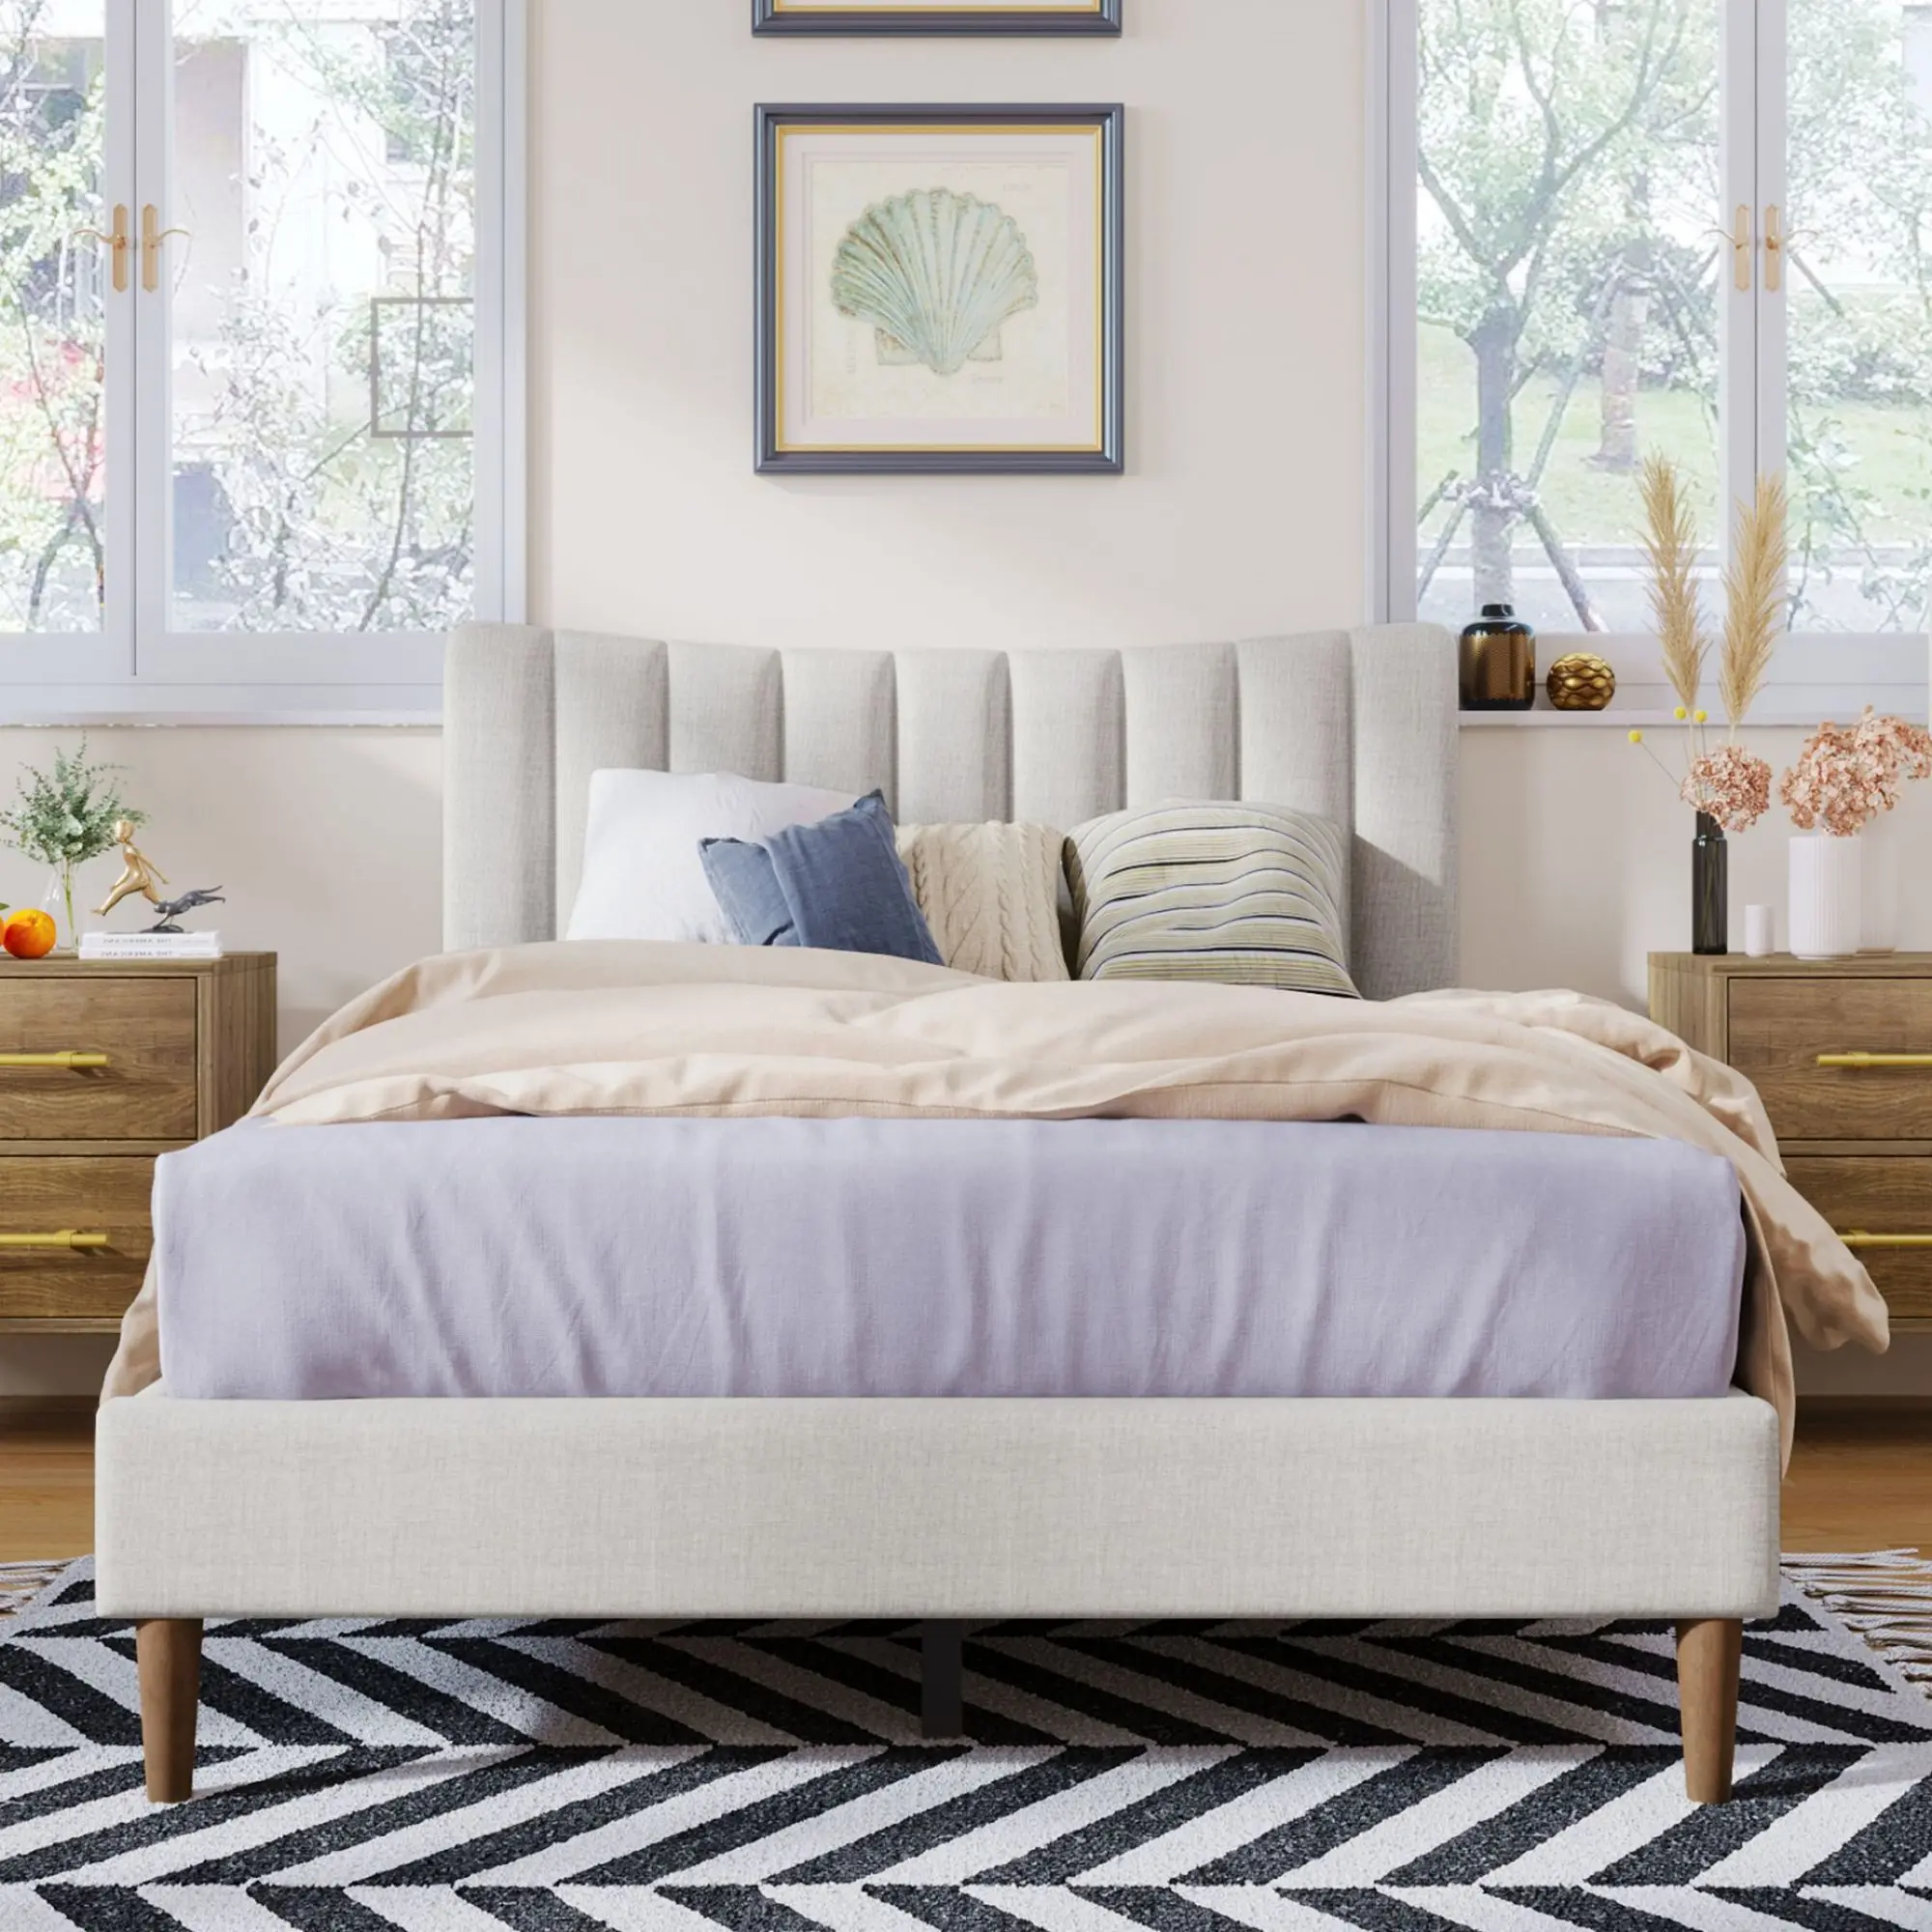 

Upholstered Platform Bed Frame with Vertical Channel Tufted Headboard, No Box Spring Needed